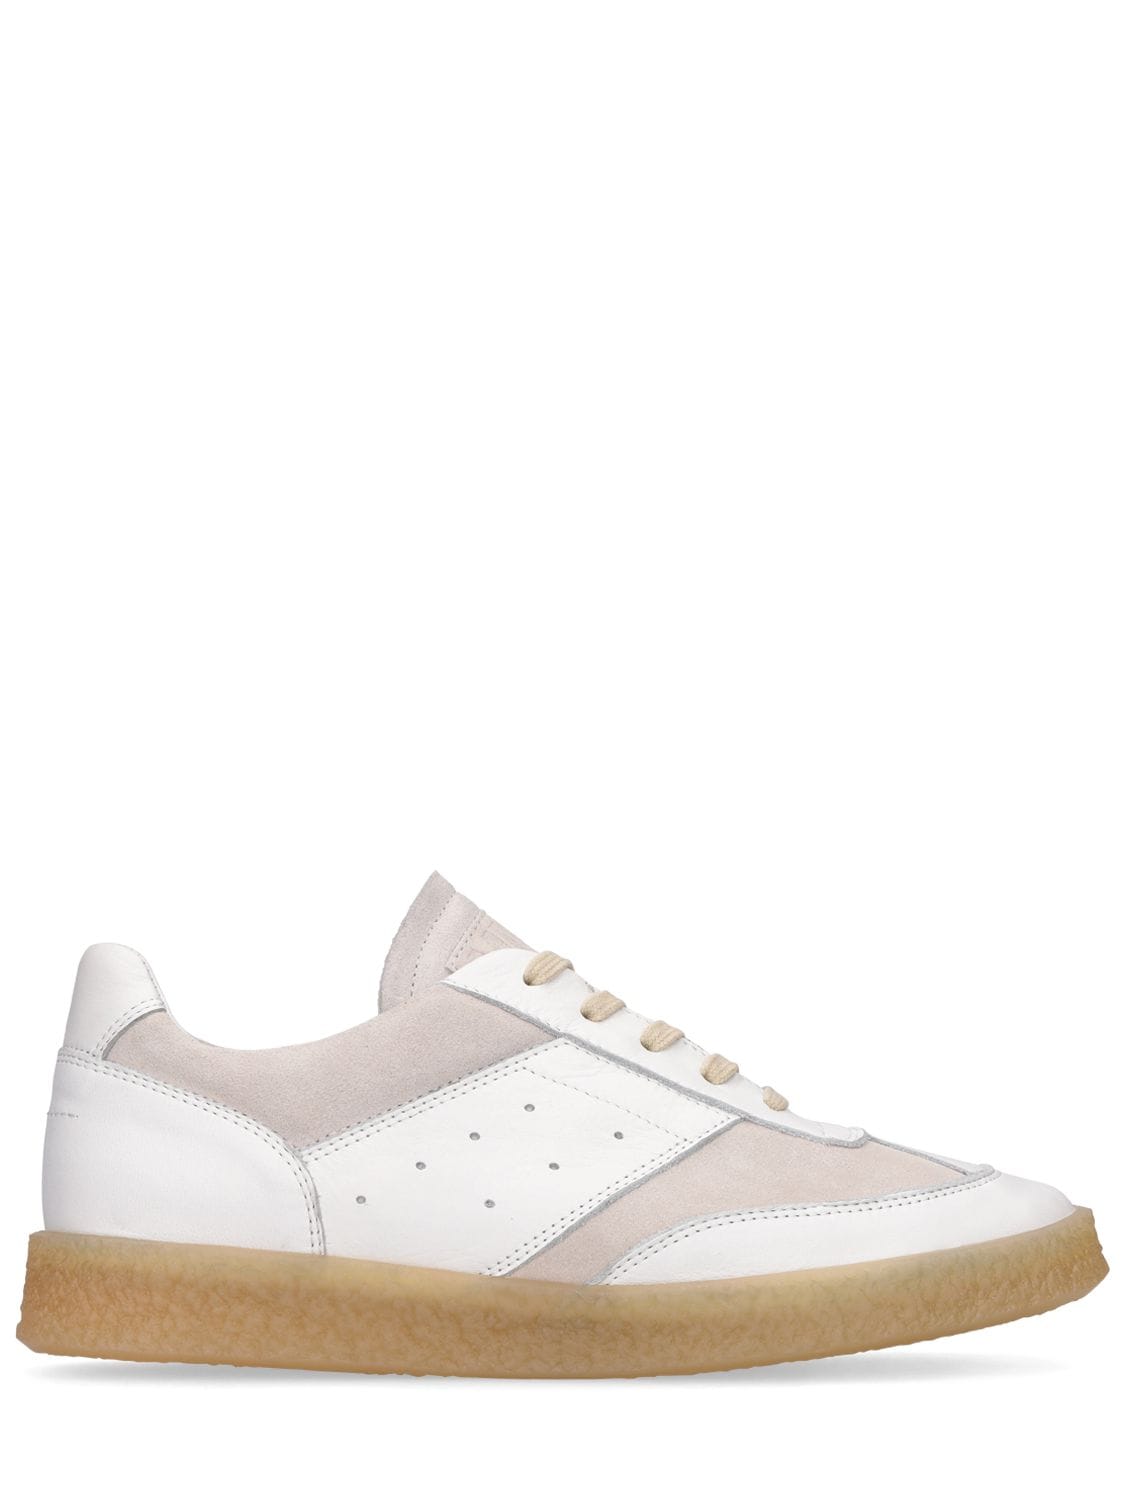 Mm6 Maison Margiela Leather Low Top Sneakers In White,grey